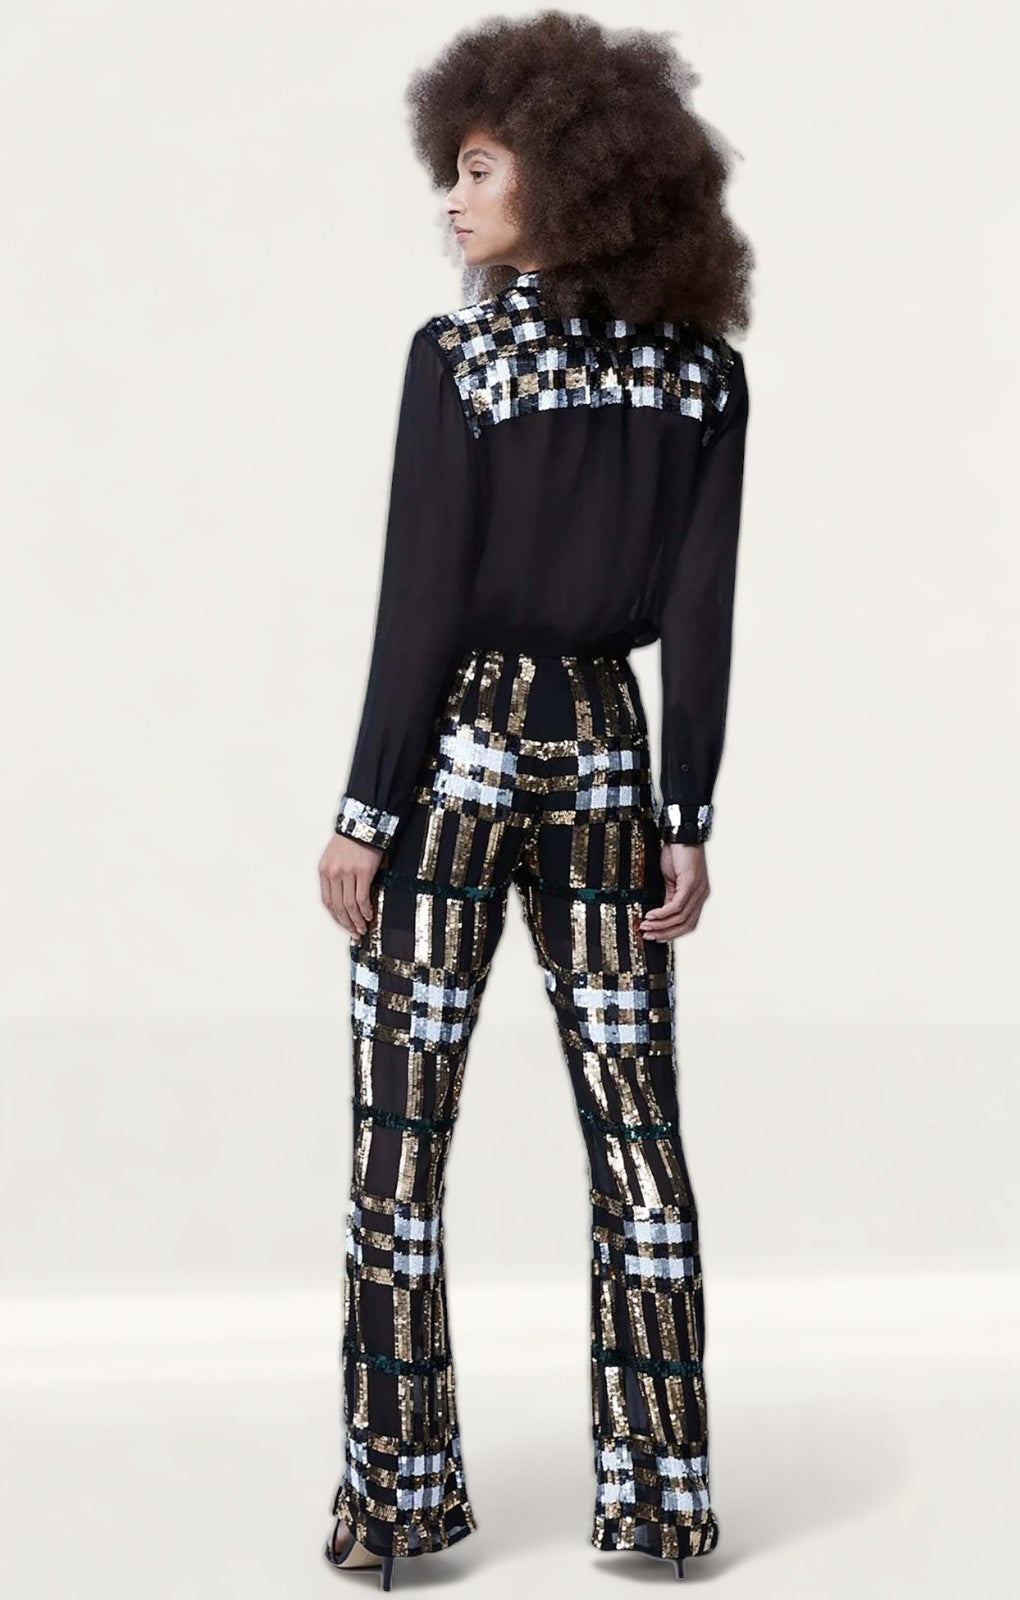 French Connection Bala Sequin Co-Ord product image